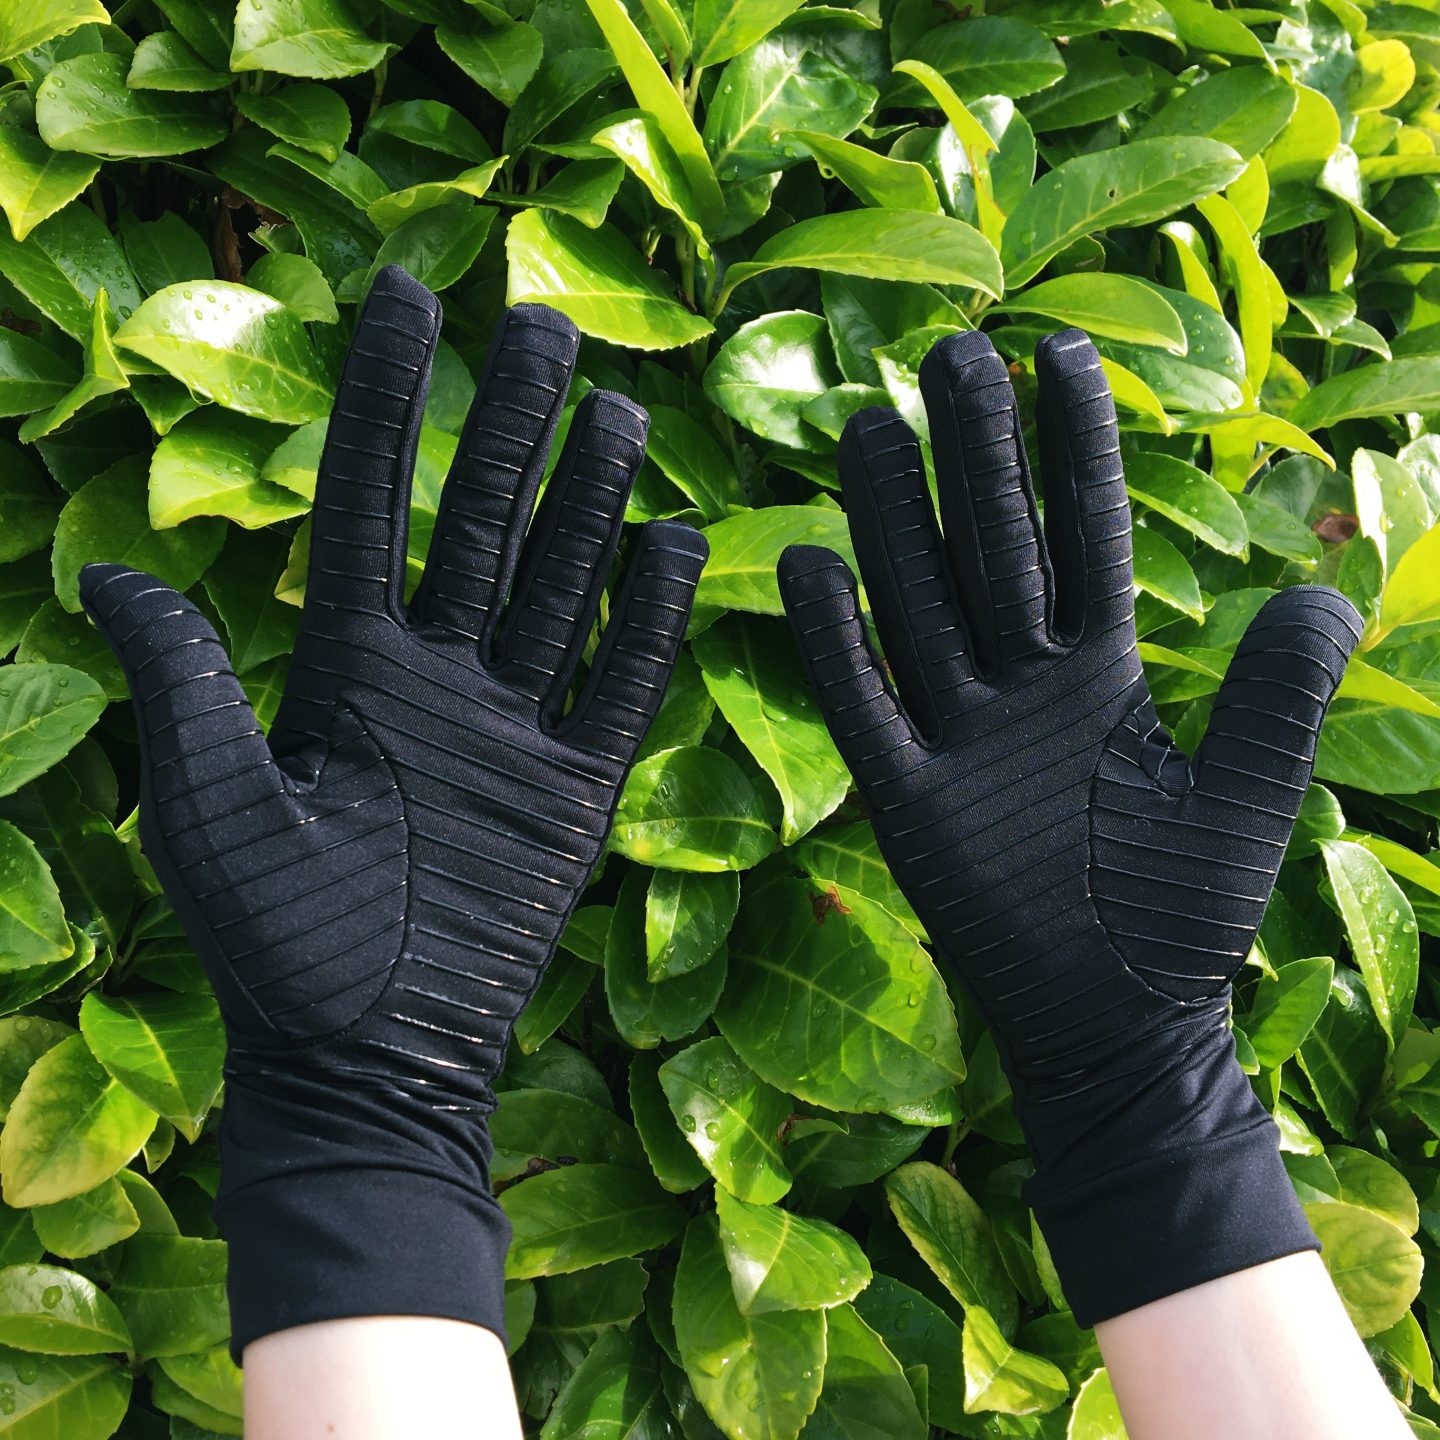 A close-up photo of my hands and forearms. I'm wearing the black Copper Clothing compression gloves I was gifted for this review. My hands are held up with the green leaves of the plant in my garden as the background. My hands are turned to show the palms, where lines cross over the palms and fingers to provide a rubberised grip.